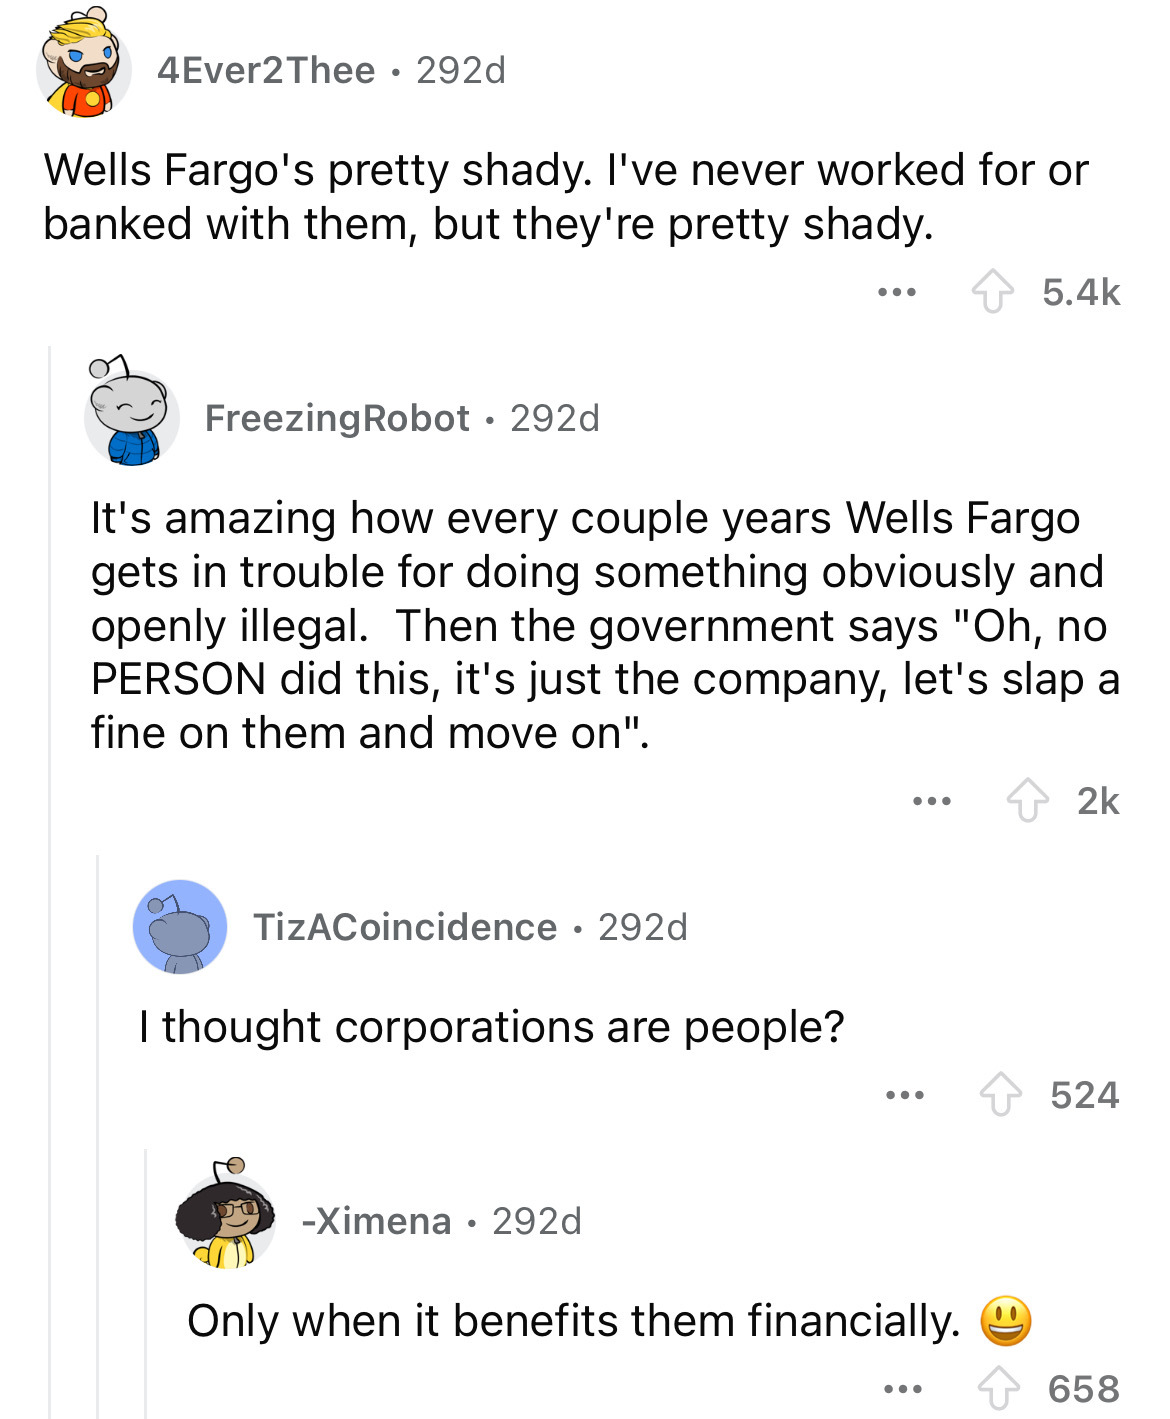 screenshot - 4Ever2Thee 292d Wells Fargo's pretty shady. I've never worked for or banked with them, but they're pretty shady. ... FreezingRobot 292d It's amazing how every couple years Wells Fargo gets in trouble for doing something obviously and openly i